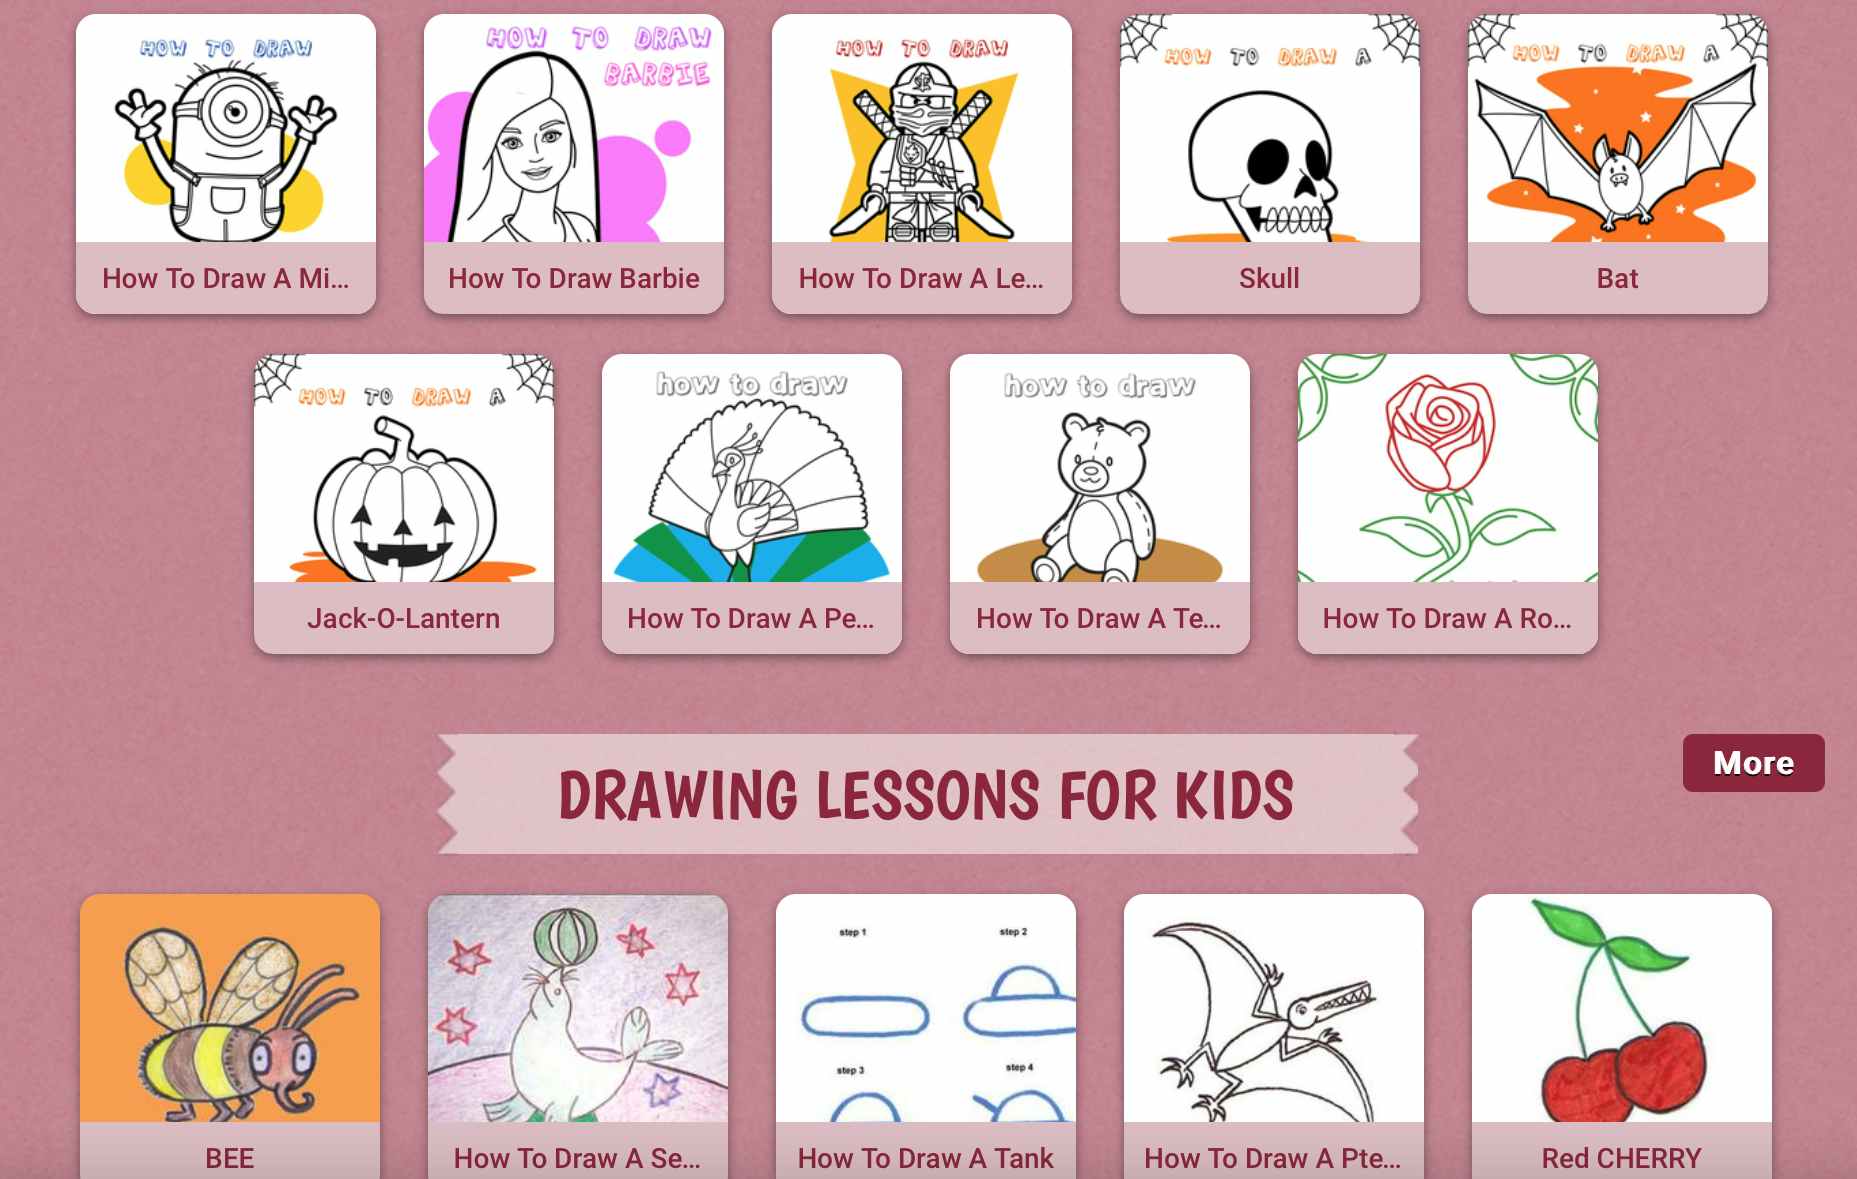 A screenshot of the Hello Kids webpage for online drawing lessons for kids.